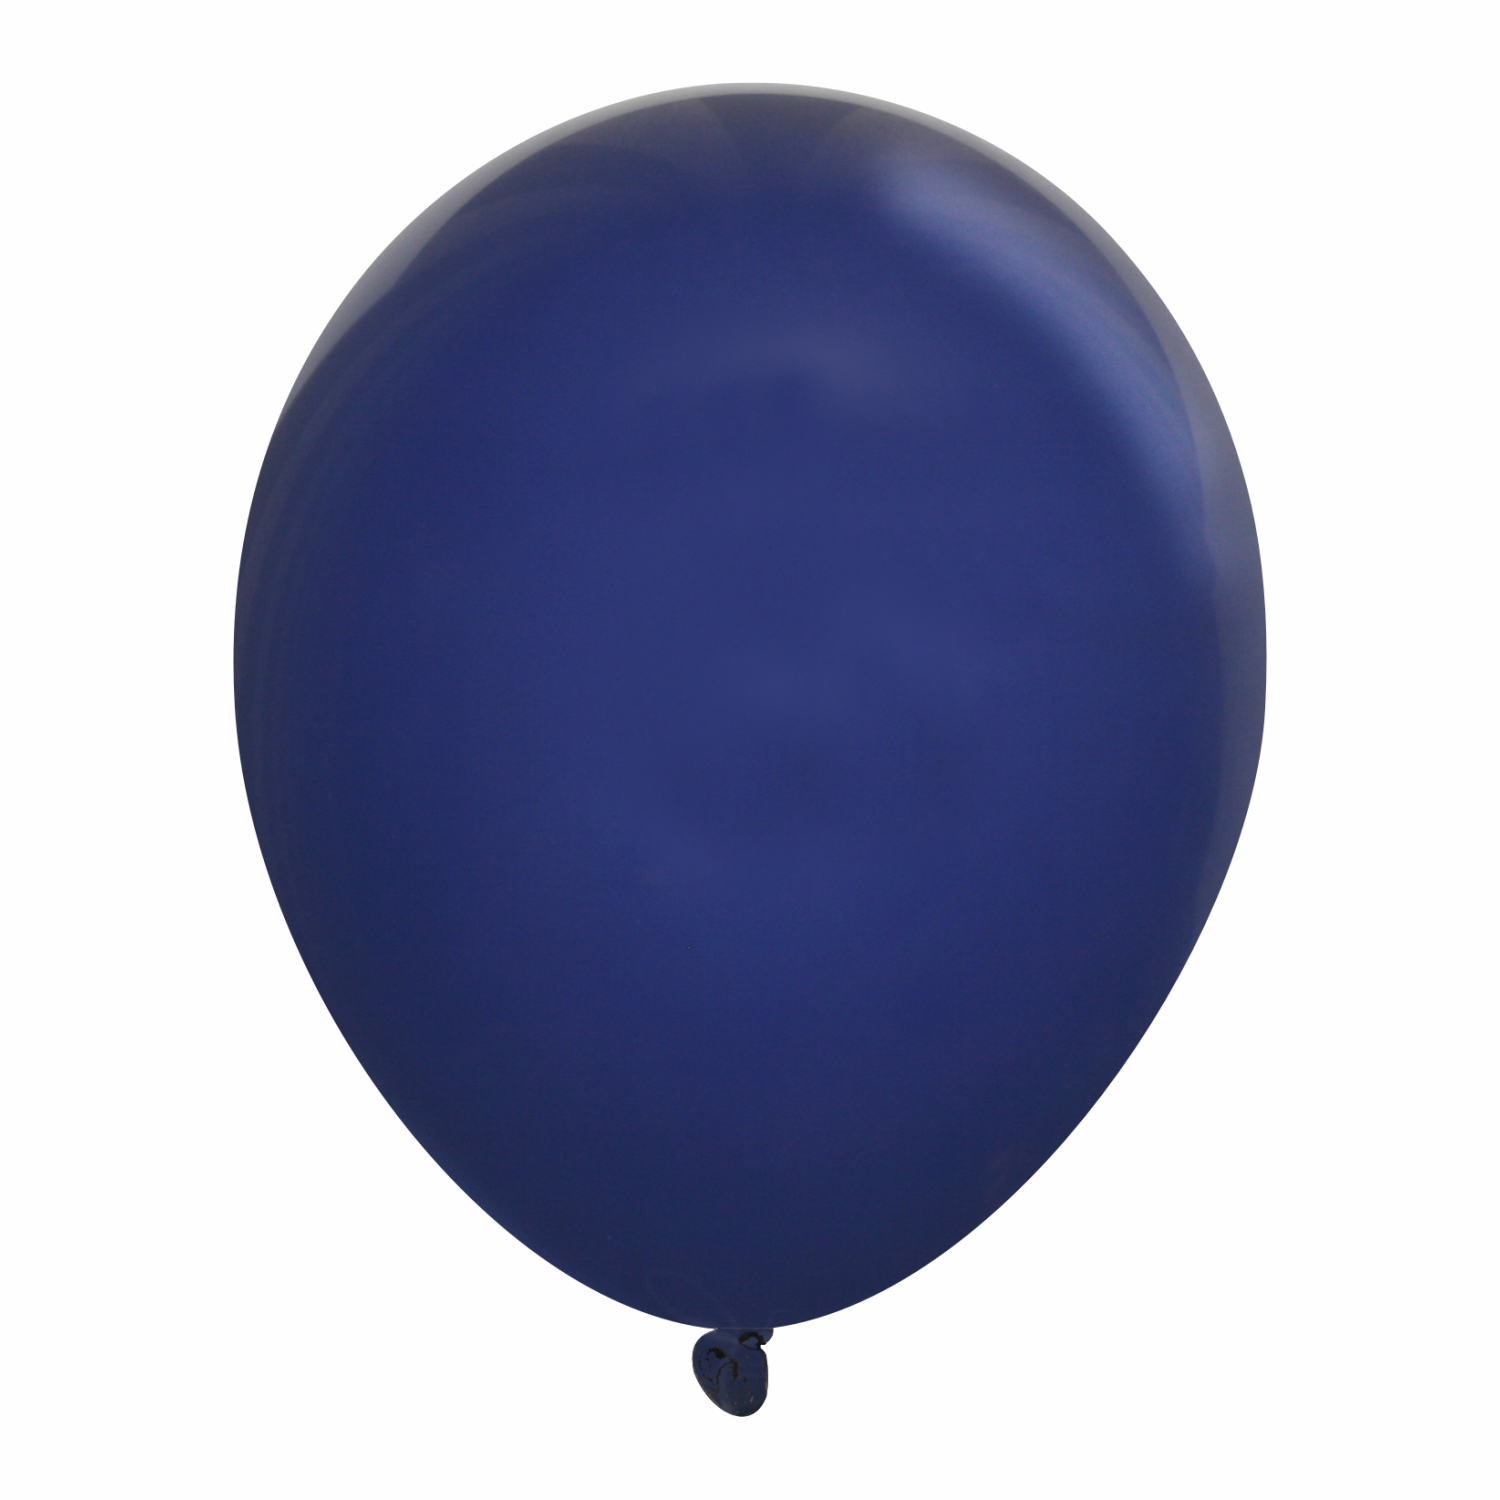 http://images.officebrain.com/migration-api-hidden-new/web/images/626/11wrp-fas-navy-blue.png